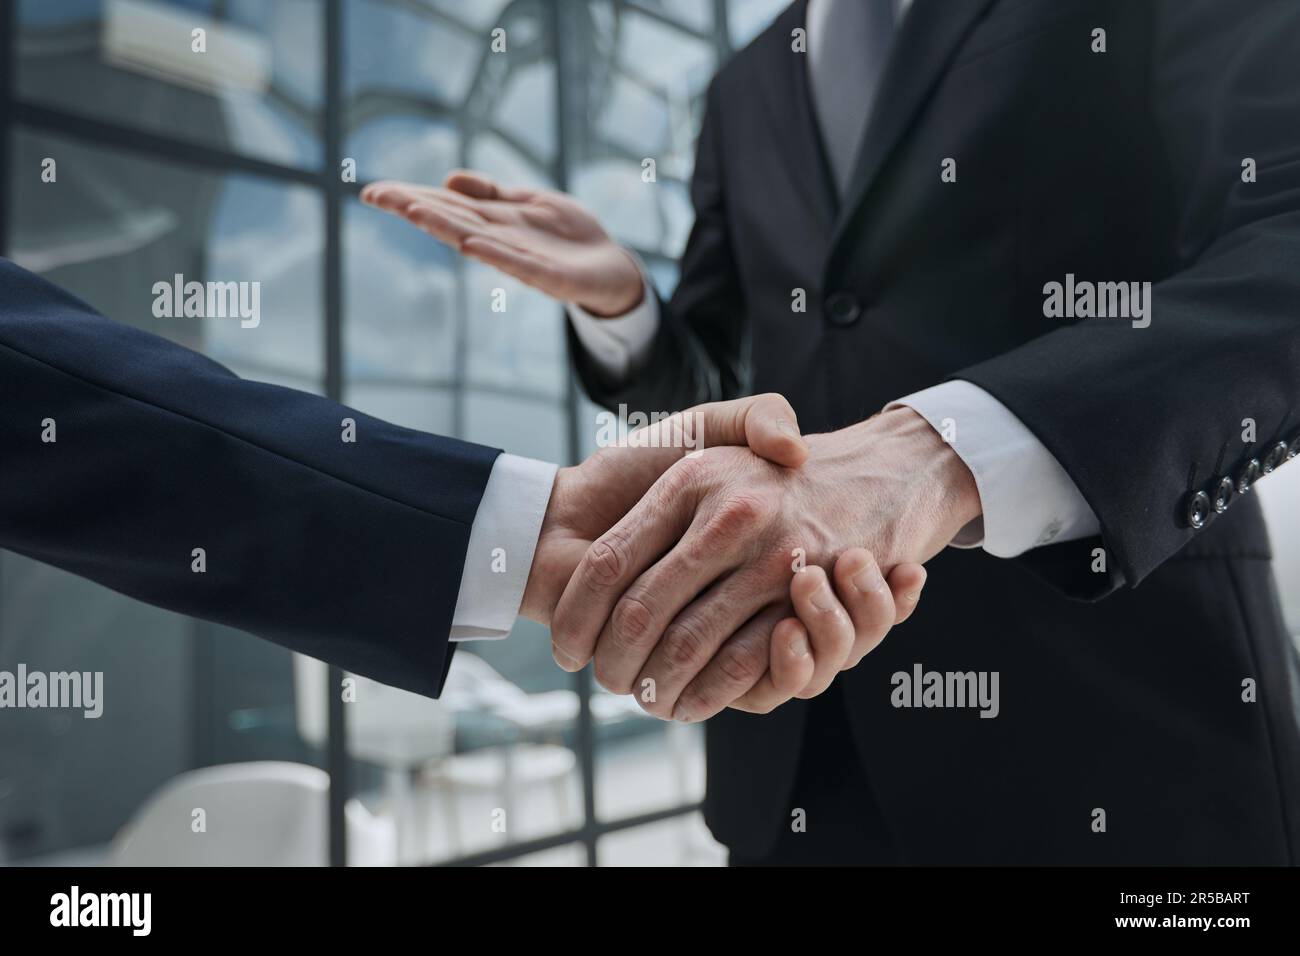 Handshake of two businessmen on the background of bright conference room, partnership concept, close up Stock Photo